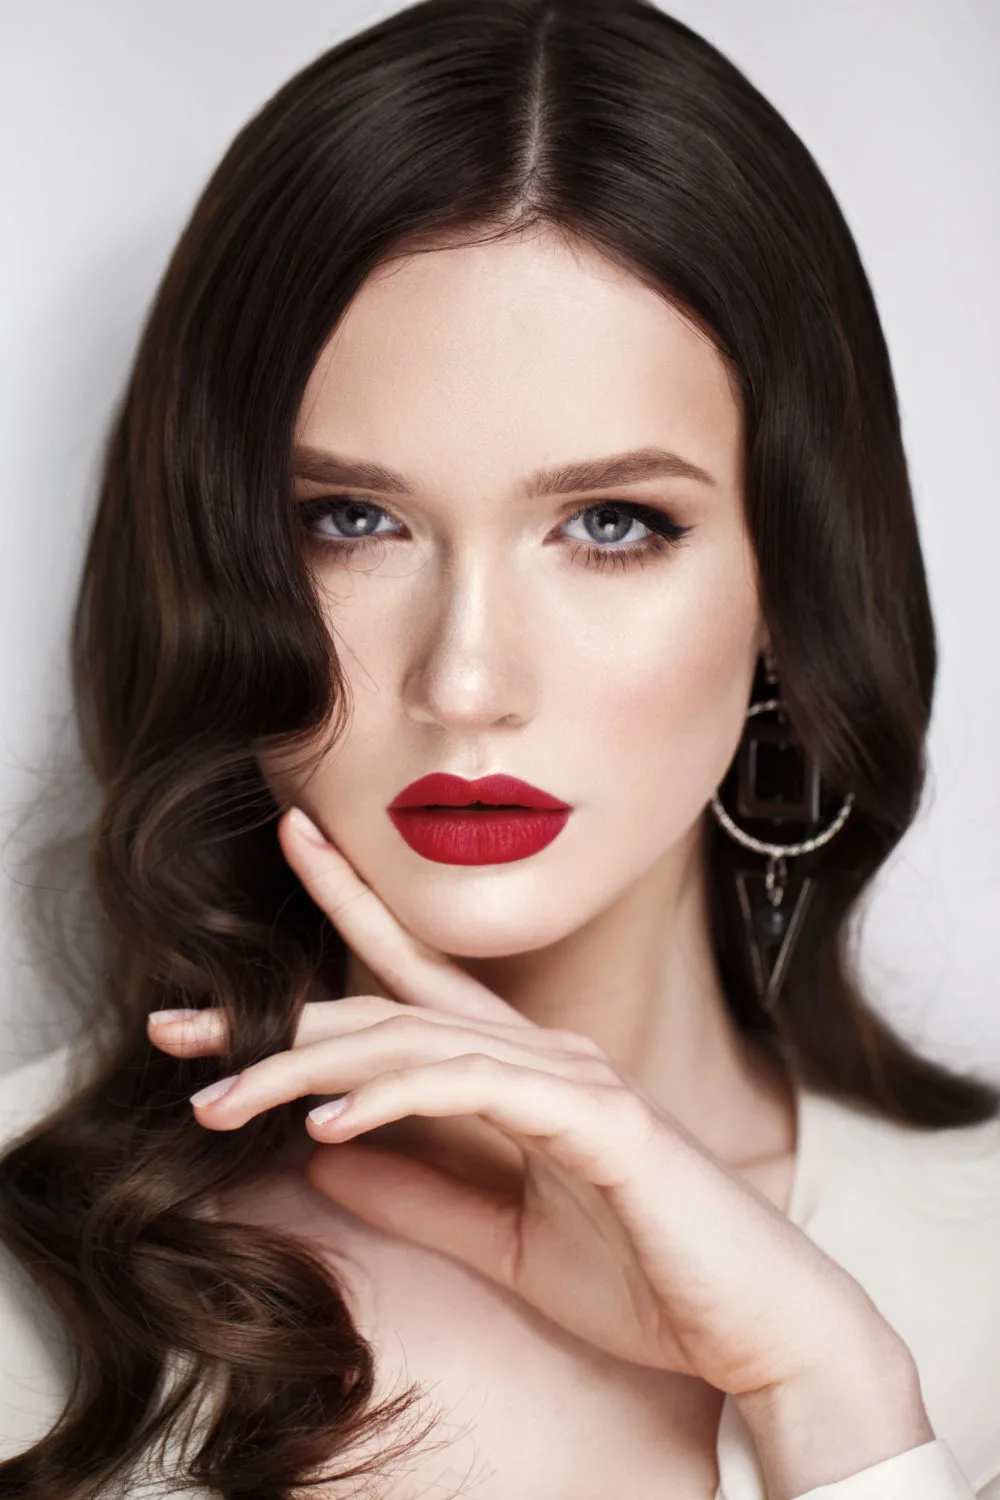 Cool Mocha Brown, one of the best hair colors for pale skin, on a woman with red lips